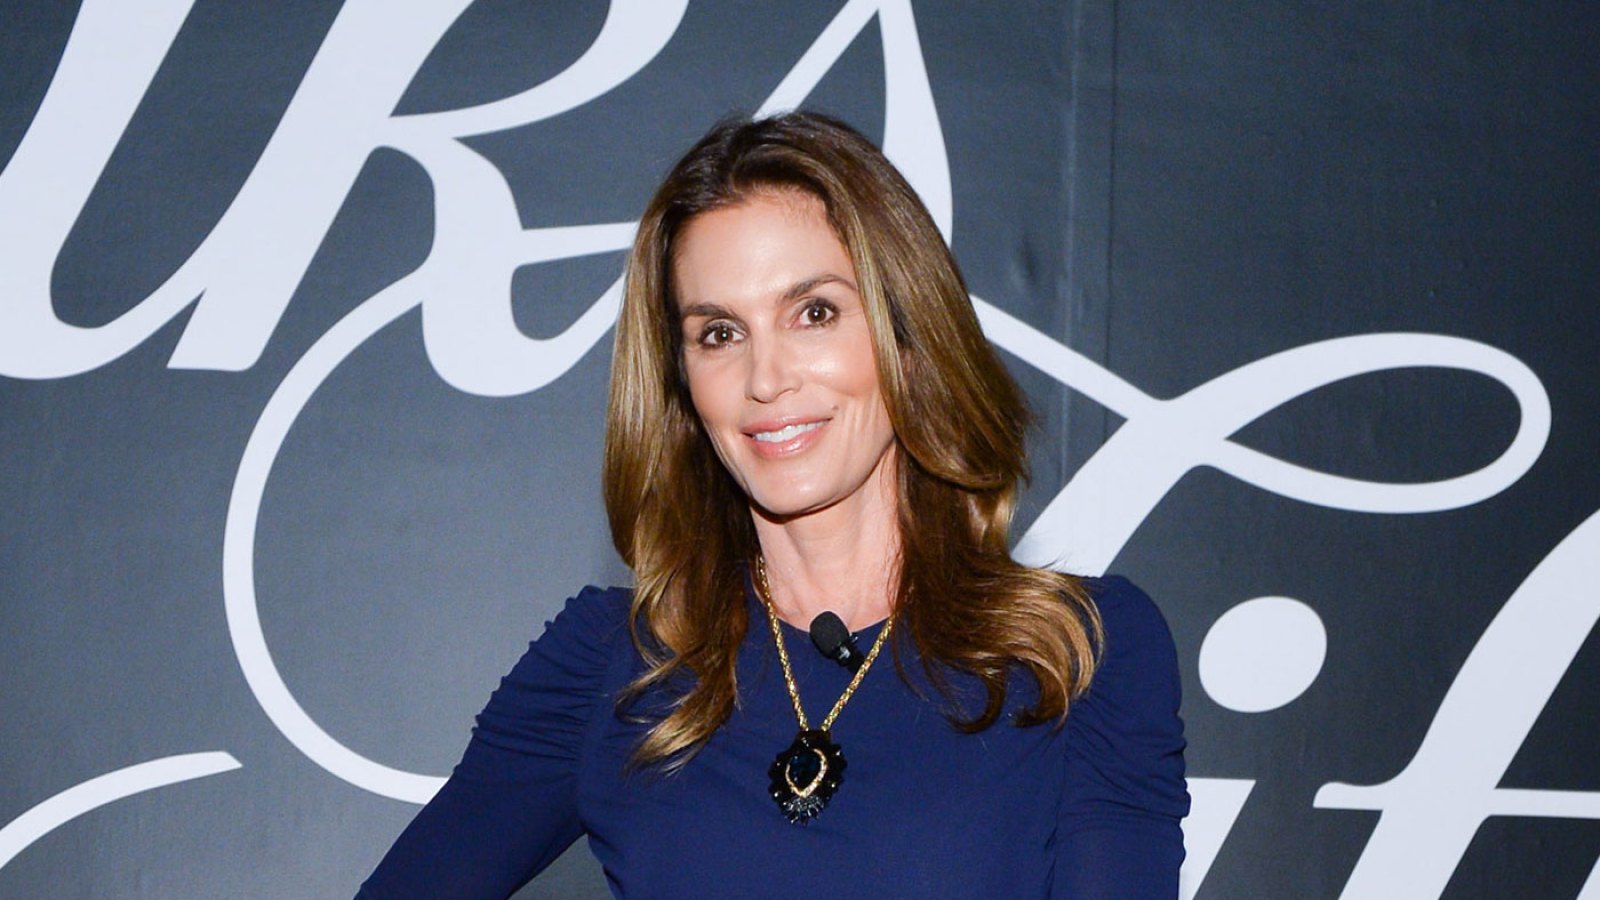 Cindy Crawford attends Saks Fifth Avenue private cocktail and Q & A with Fern Mallis